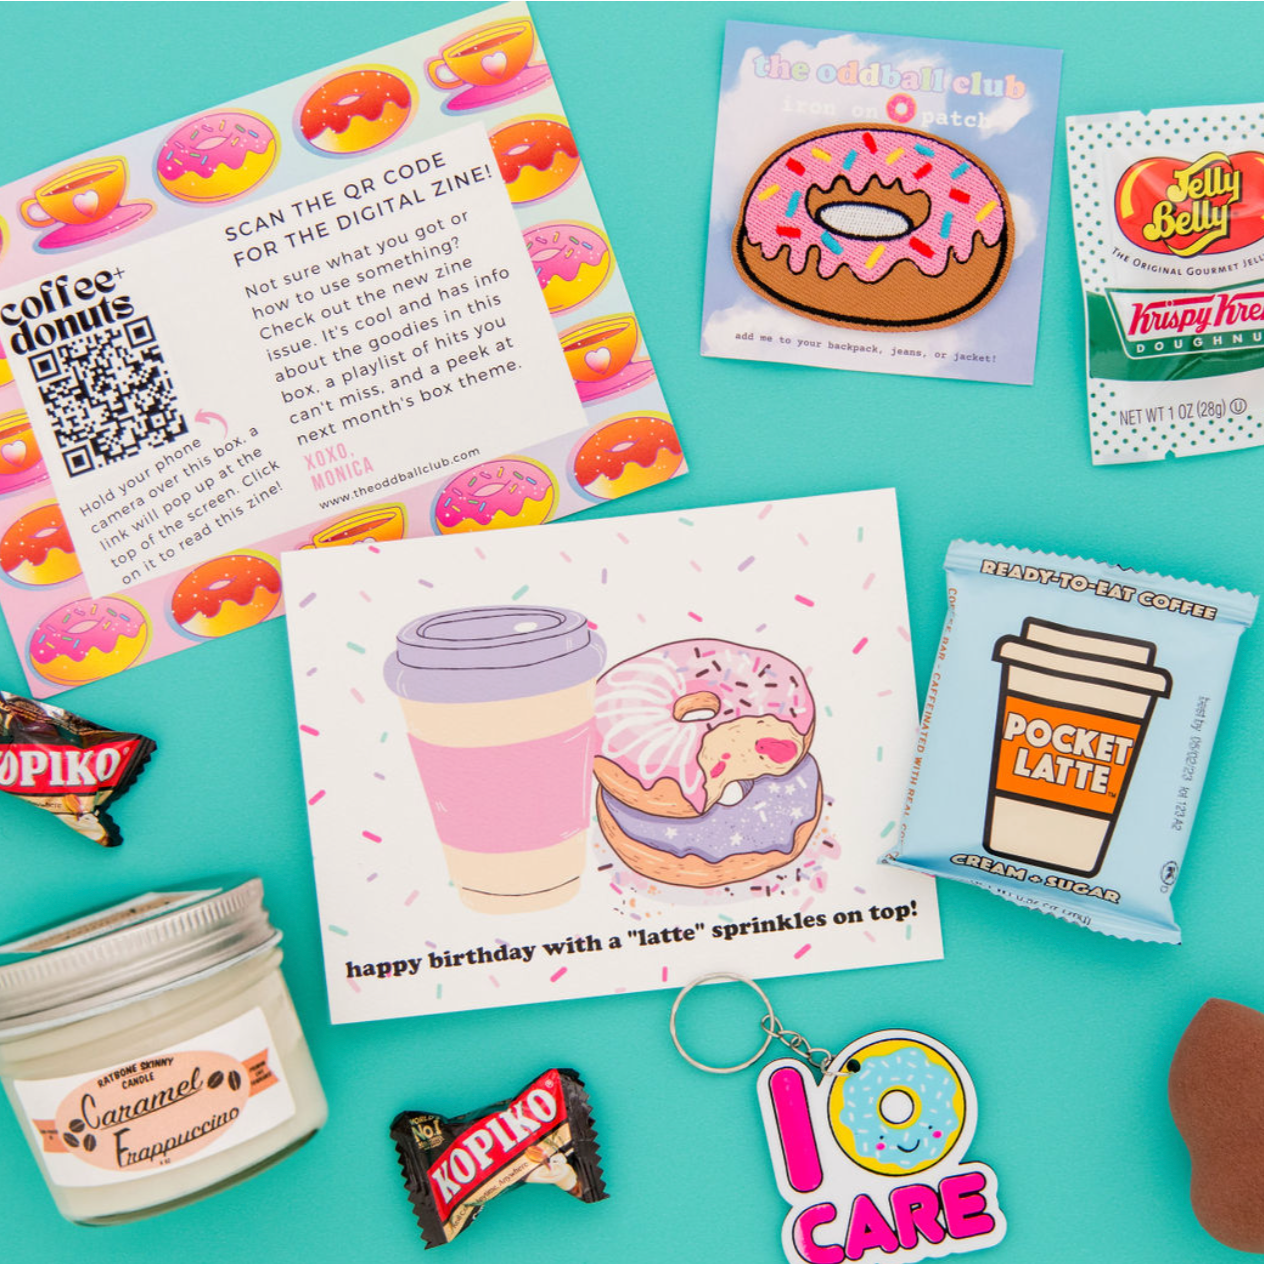 A deliciously sweet birthday greeting card featuring sprinkles and a latte topped with sprinkles, accompanied by a stack of two donuts. A playful octopus sticker with donuts in the corner adds a touch of whimsy, while a background of blue showcases Kopiko candy. Perfect for coffee and sweets lovers, this image evokes a sense of celebration and joy